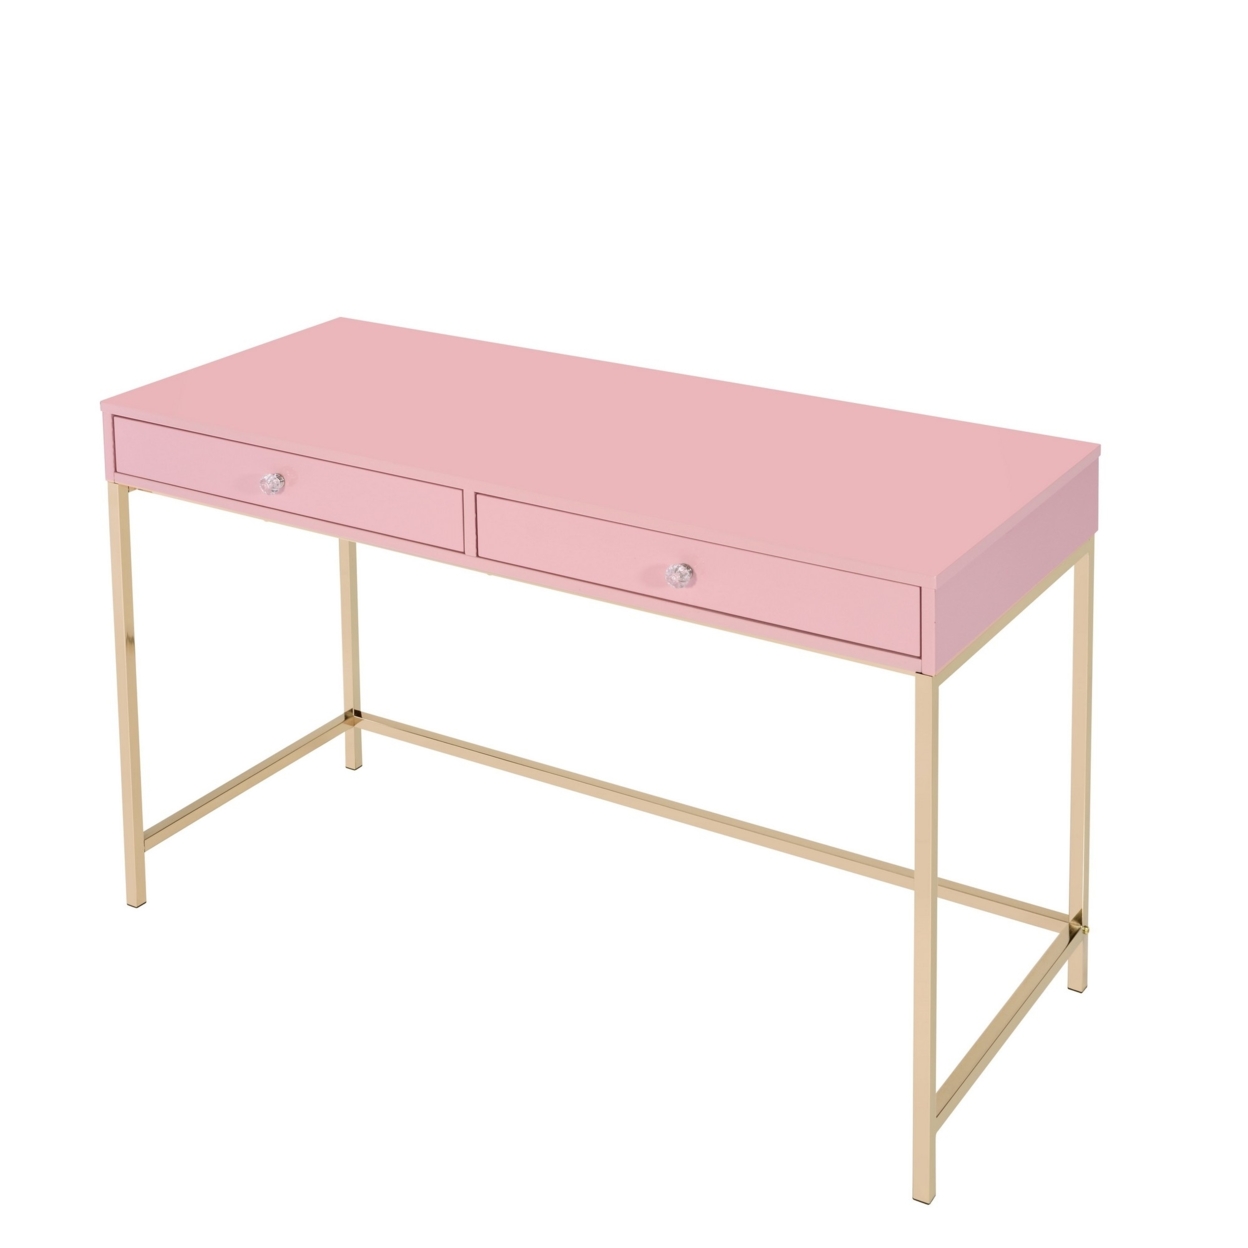 Writing Desk With 2 Storage Compartments, Pink And Gold- Saltoro Sherpi